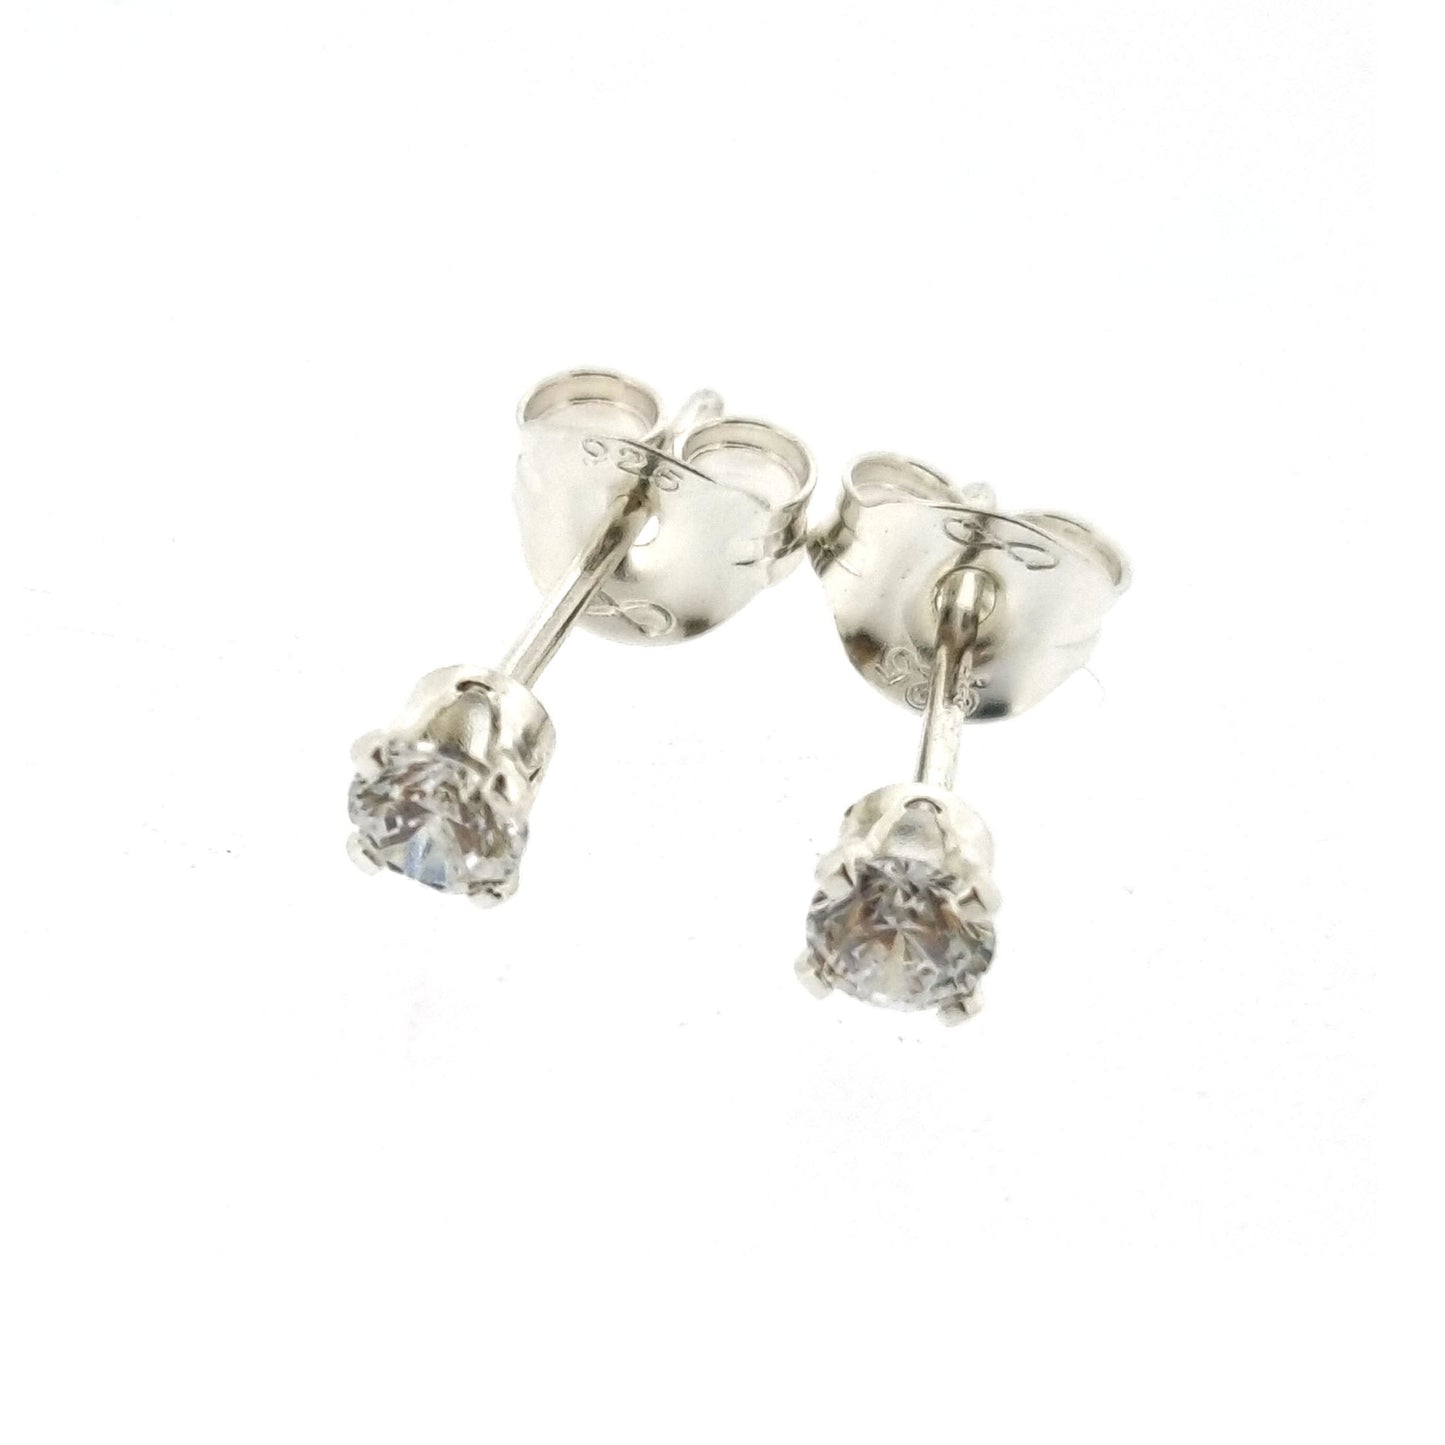 Silver 4 claw stud earrings with CZ gemstones - 3mm